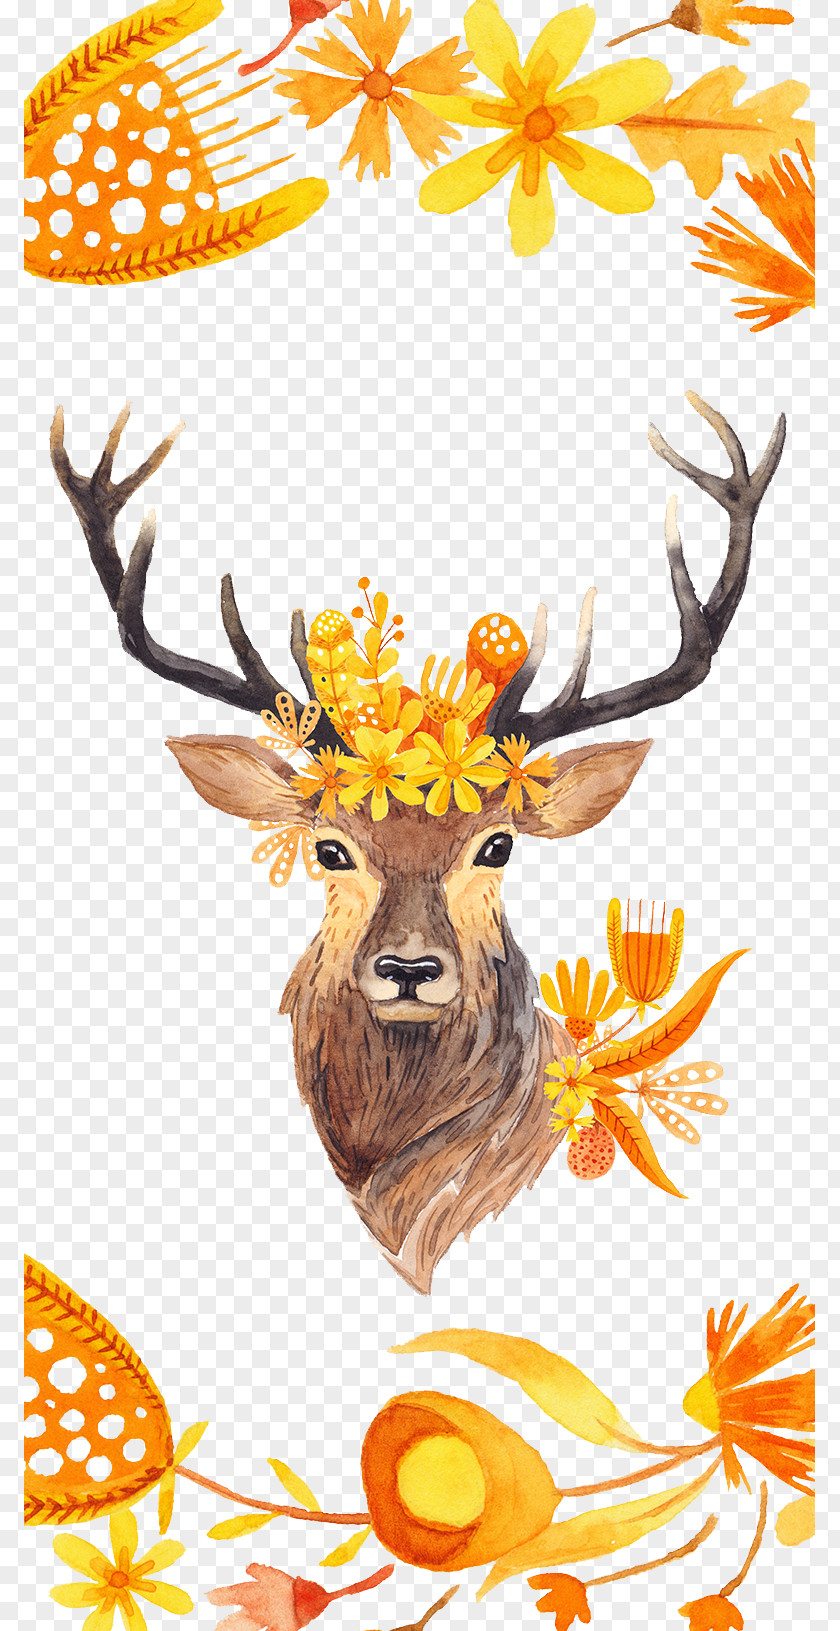 Autumn Hand-painted Watercolor Deer PNG hand-painted watercolor deer clipart PNG